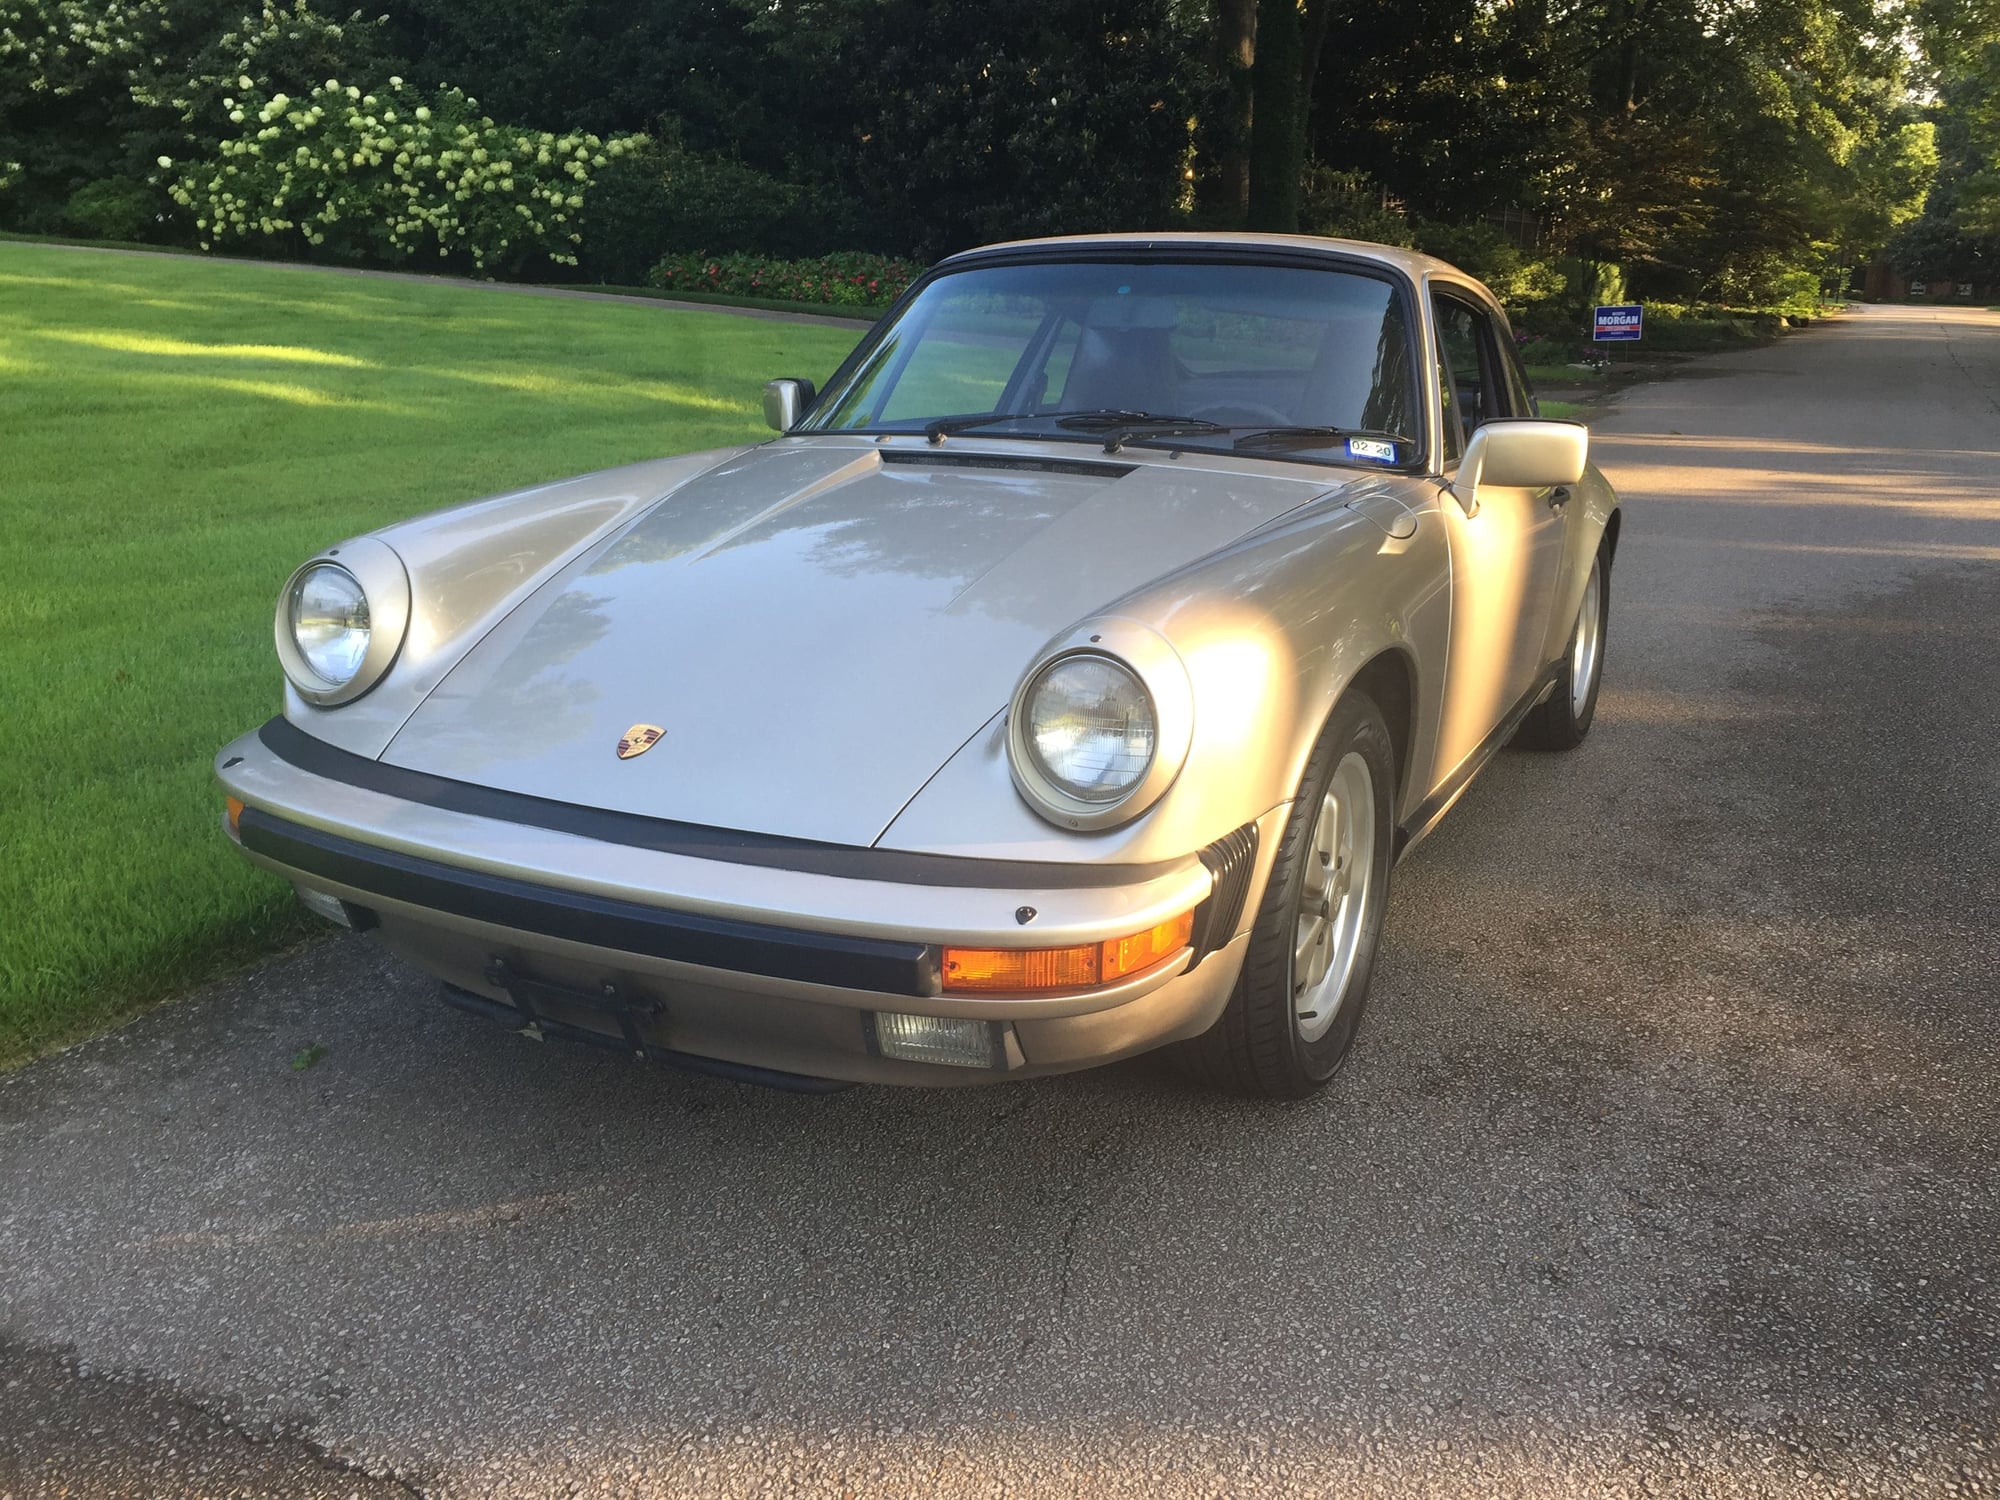 1986 Porsche 911 - 1986 PORSCHE 911 CARRERA COUPE 3.2 Liter ** WHITE GOLD METALLIC - 1 OWNER 30 YEARS ** - Used - VIN WP0AB0919GS121392 - 70,000 Miles - 6 cyl - 2WD - Manual - Coupe - Gold - Memphis, TN 38122, United States